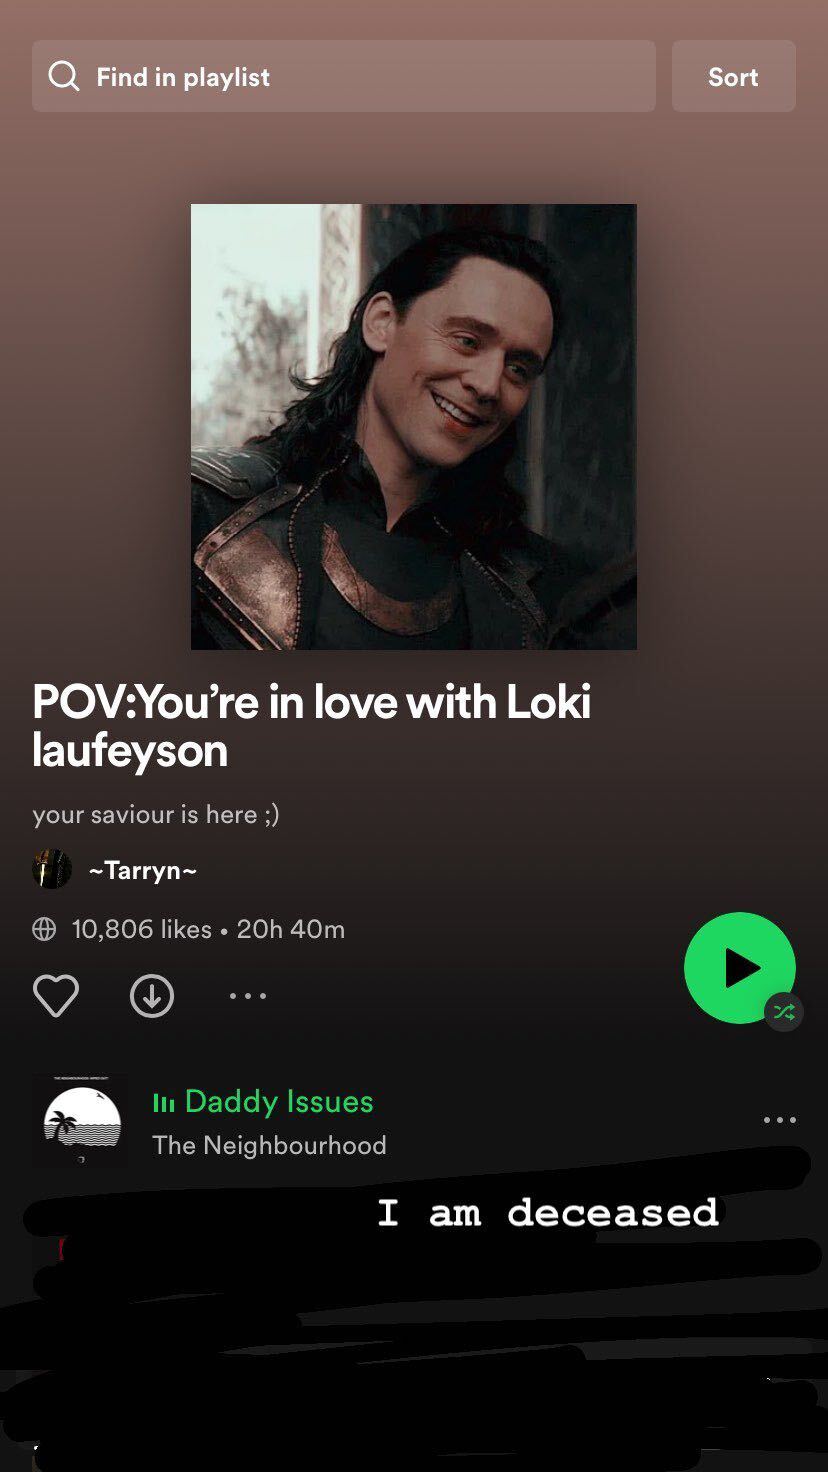 A playlist called POV: You're in love with Loki and the song "Daddy Issues"